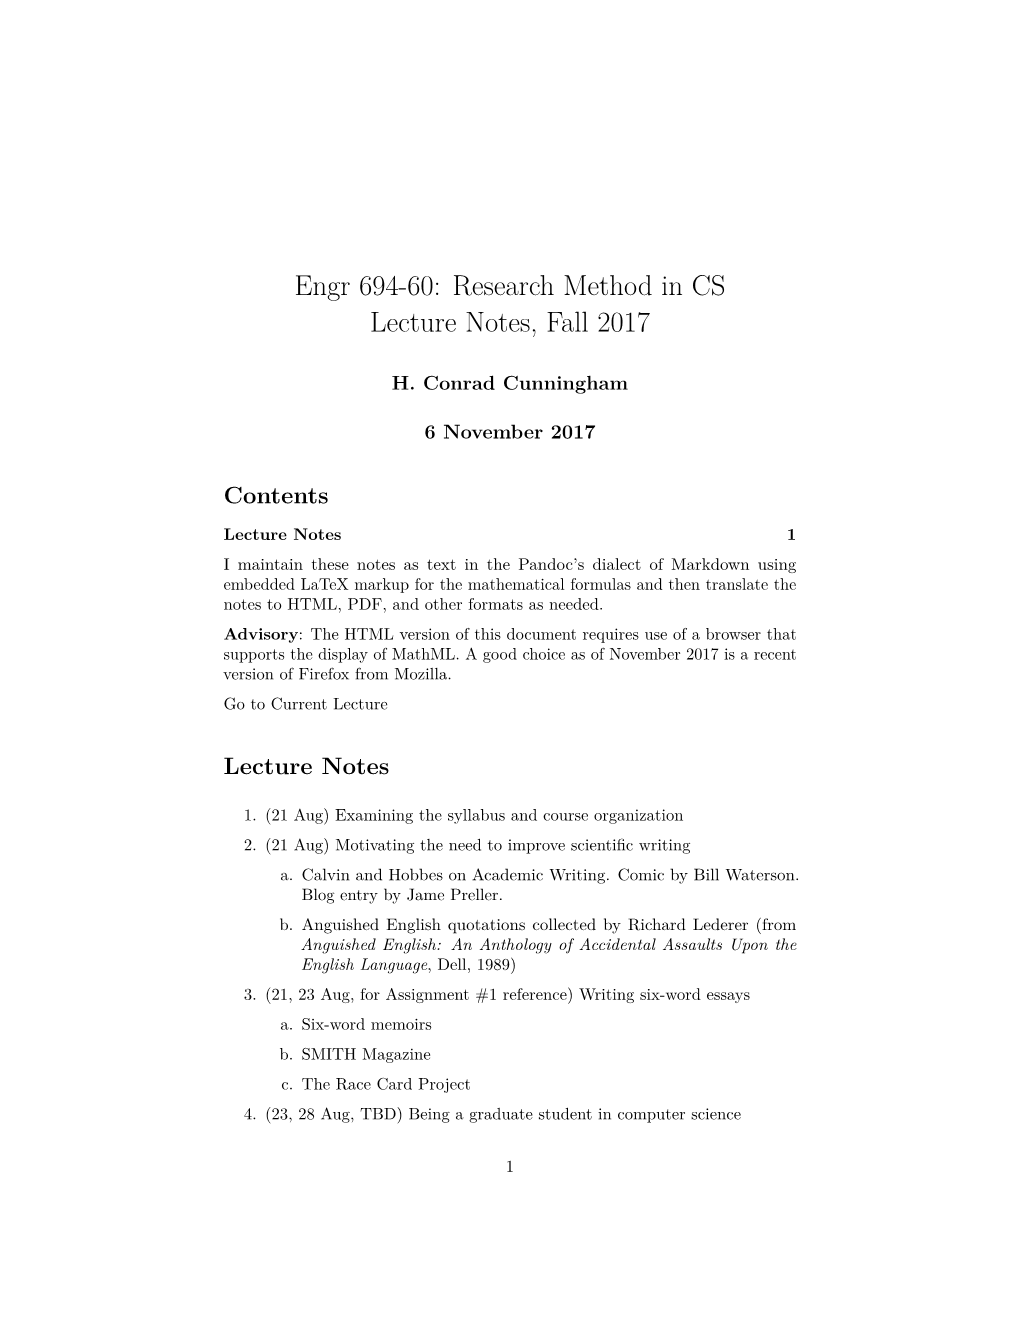 Research Method in CS Lecture Notes, Fall 2017